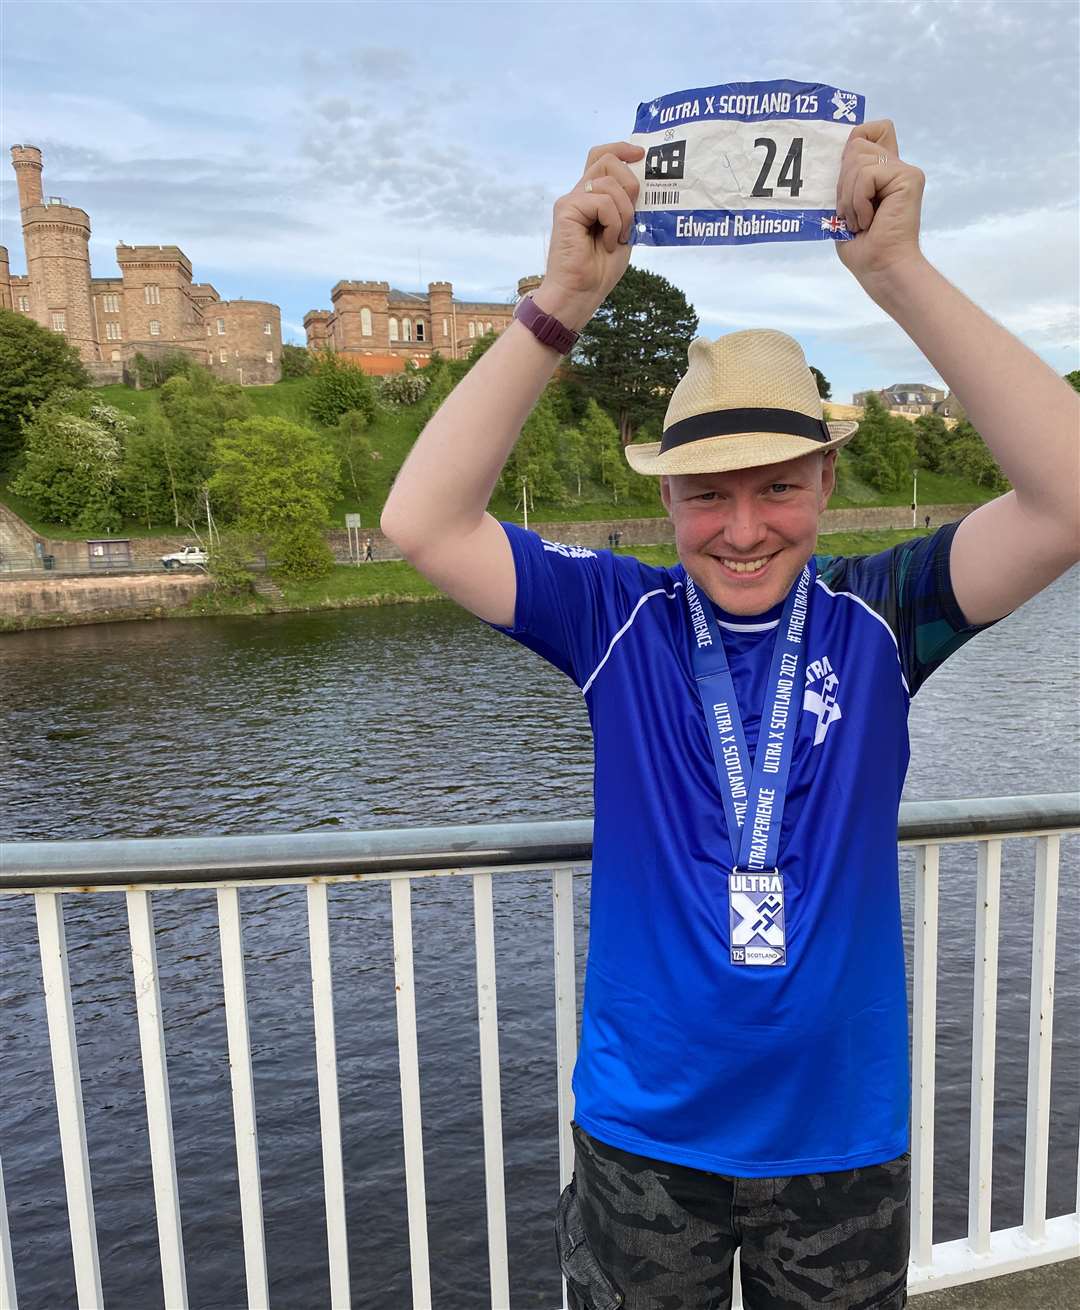 Ed Robinson in Inverness with his medal after completing the Ultra X 125 Scotland.